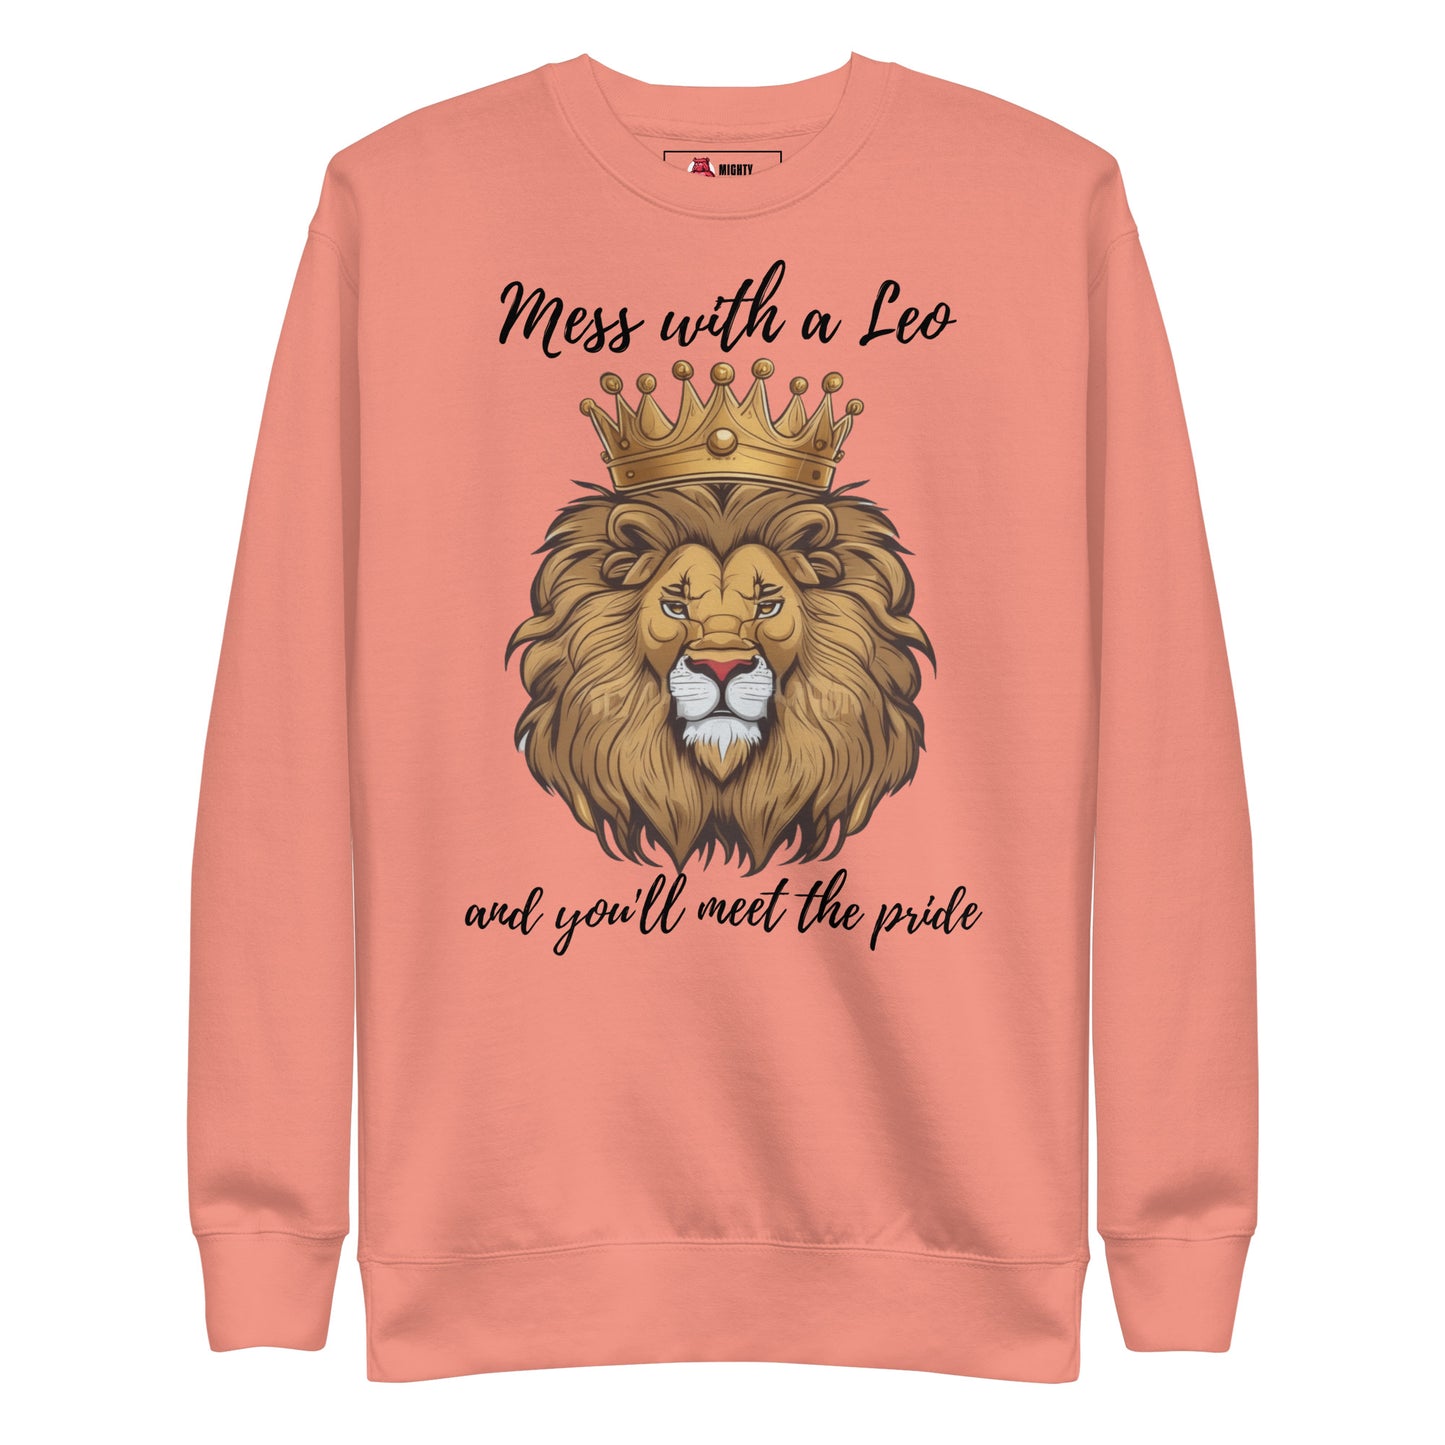 "Mess with a Leo, and you'll meet the pride" Graphic Sweatshirt